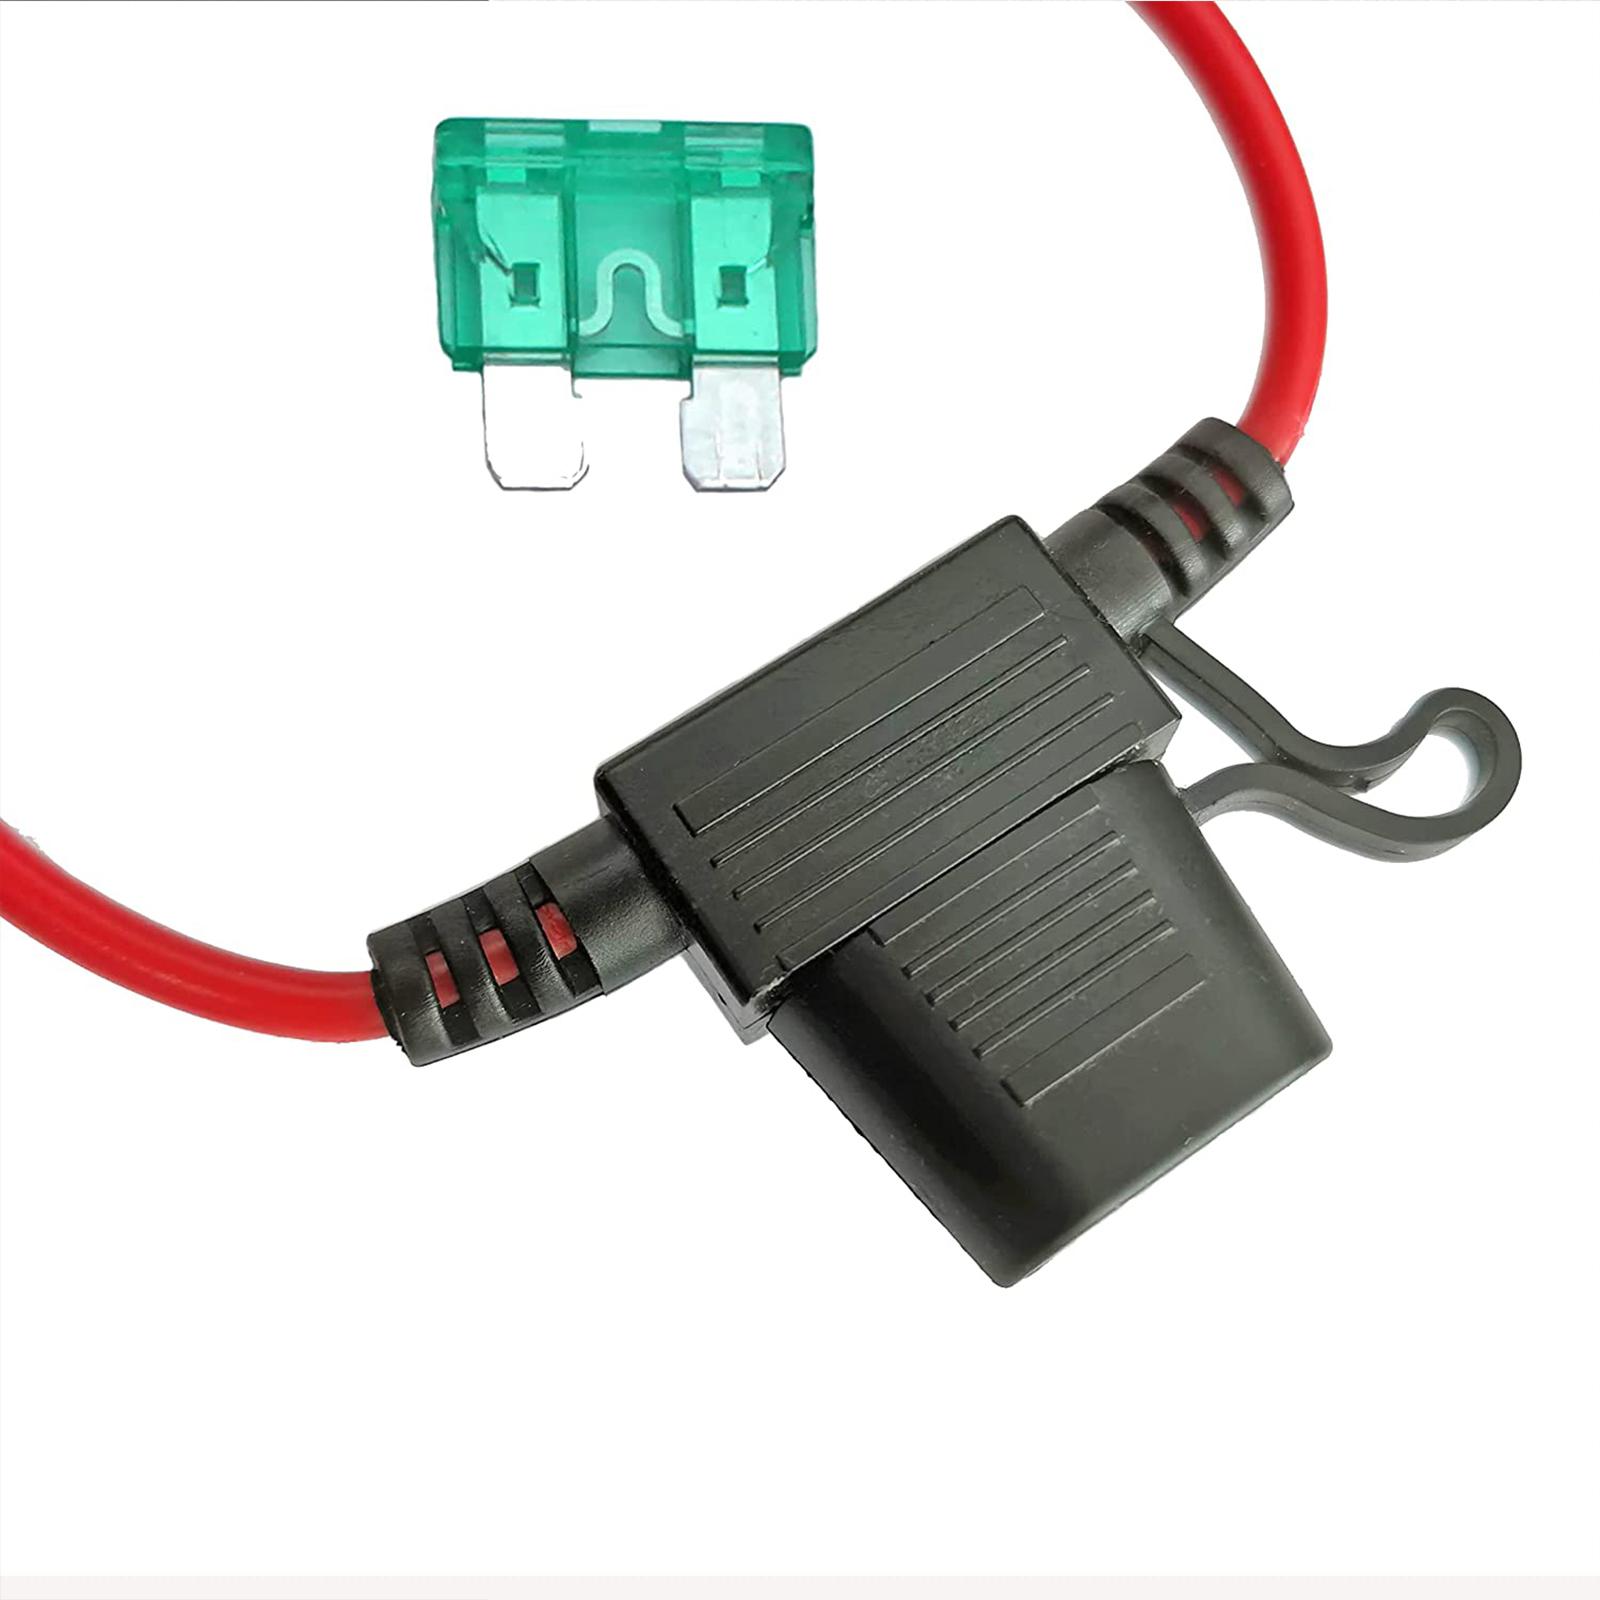 Professional Electric Fuel Pump Relay Set for 12V System Vehicles